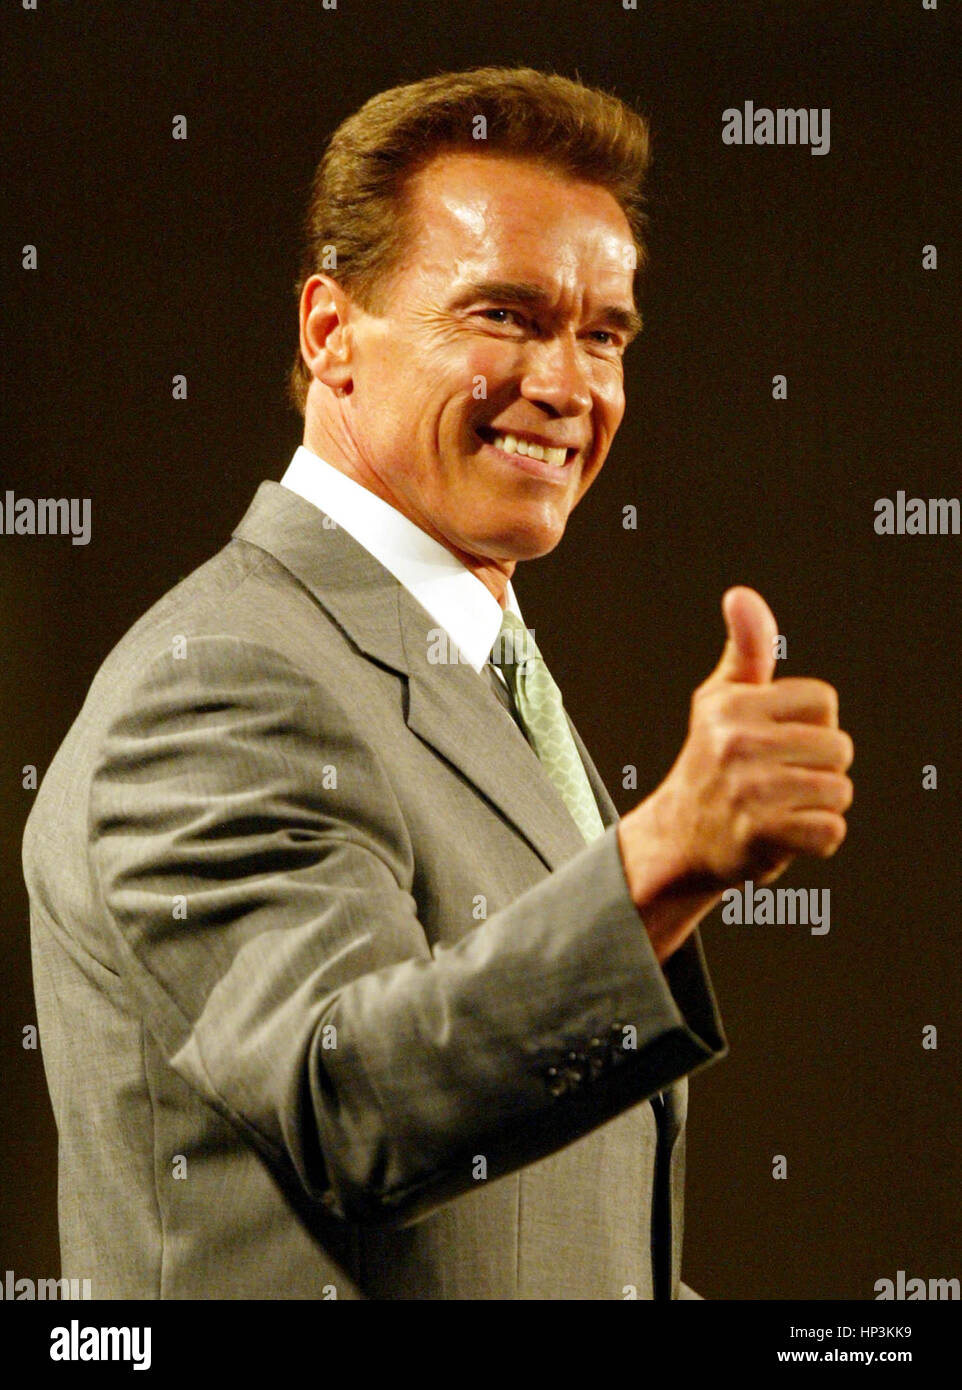 California gubernatorial candidate Arnold Schwarzenegger gives tthe thumbs up to the audience before his speech at the California Republican Convention in Los Angeles on Saturday, 13 September,  2003. Schwarzenegger is trying to get elected in California's recall election. Photo by Francis Specker Stock Photo